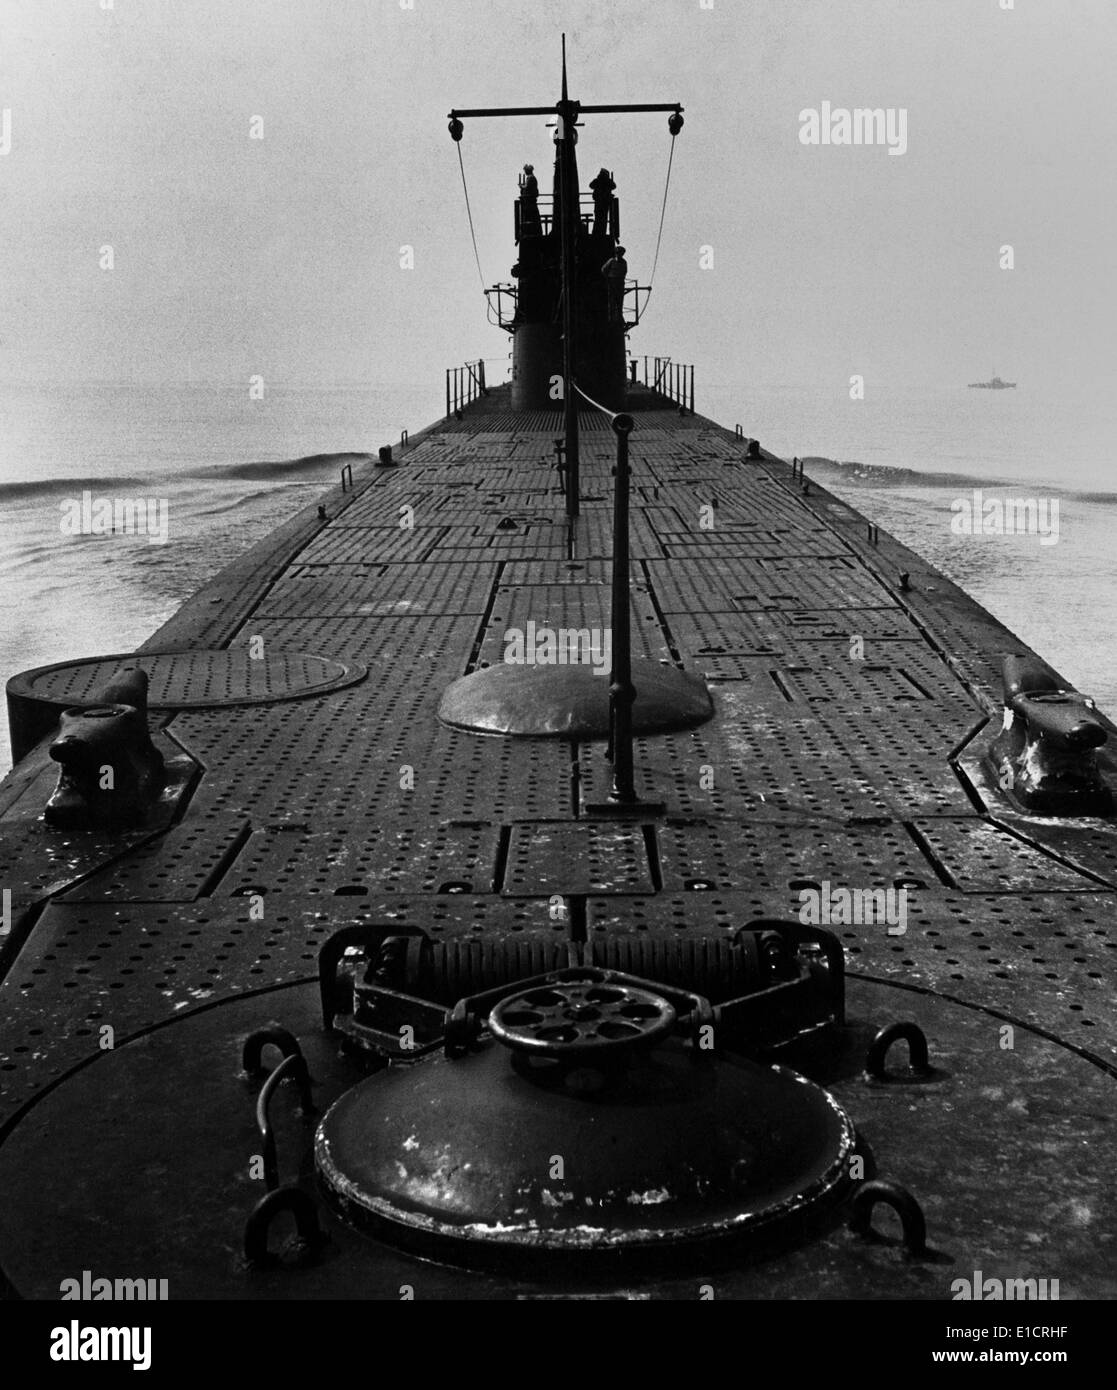 Looking forward along the deck of U.S. submarine during World War 2. August 1943. (BSLOC 2013 11 109) Stock Photo